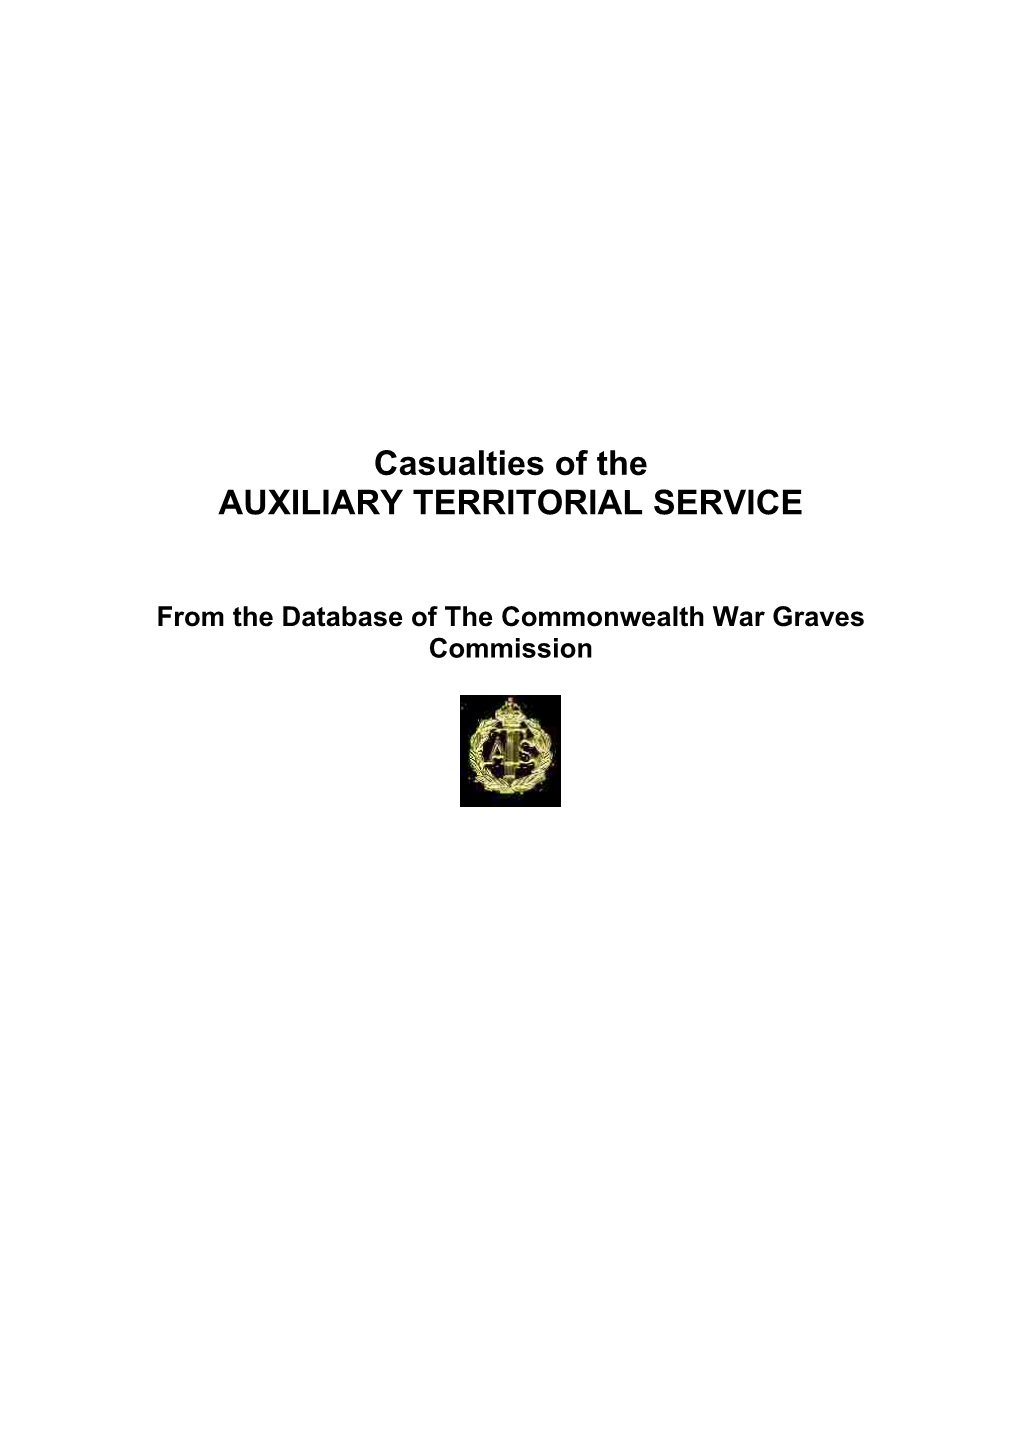 Casualties of the AUXILIARY TERRITORIAL SERVICE